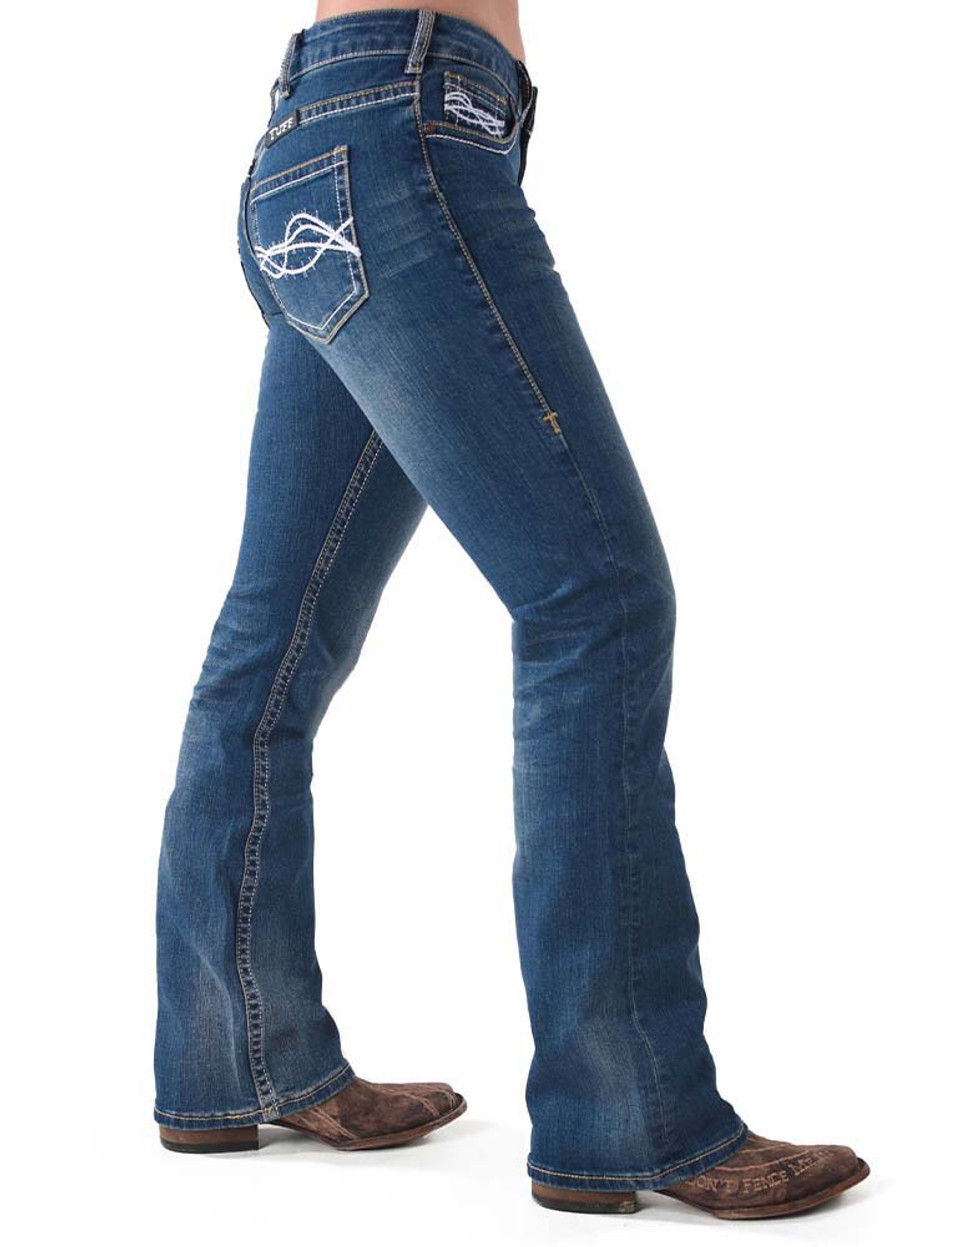 Don't Fence Me In Women's Jean - Cowgirl Tuff Company